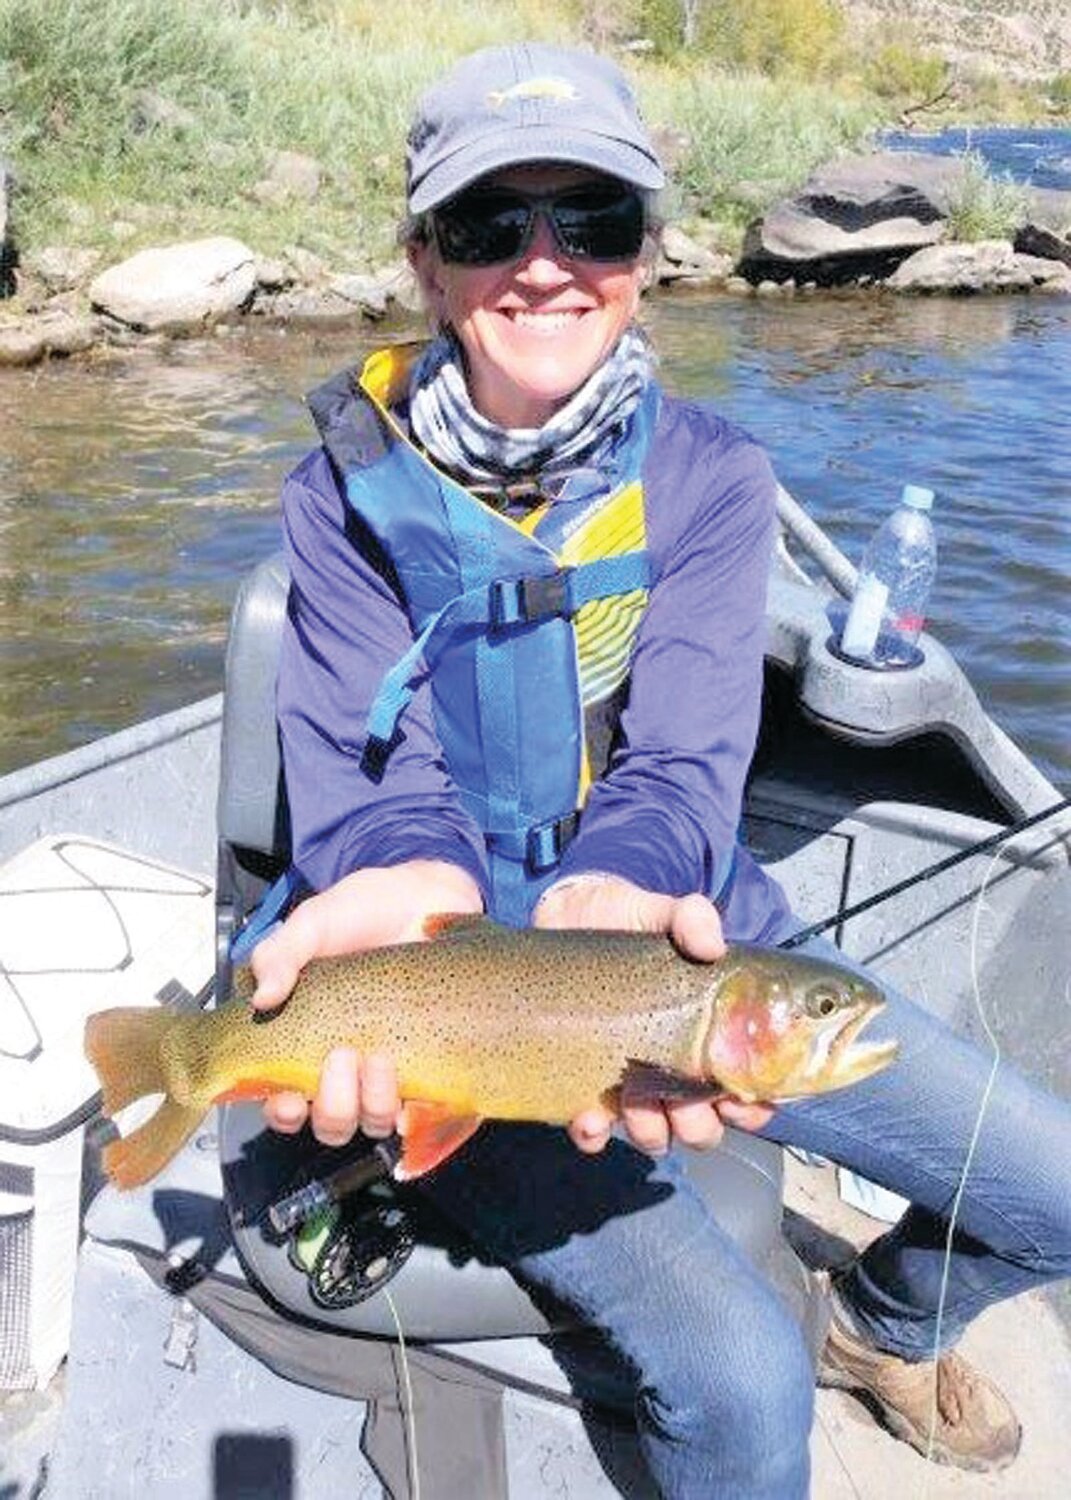 WOMEN’S CLINIC: Susan Estabrook is coordinating a Women’s Introductory Fly Fishing Clinic September 23.  The Clinic is sponsored by RI Trout Unlimited in collaboration with the South Kingstown Land Trust.